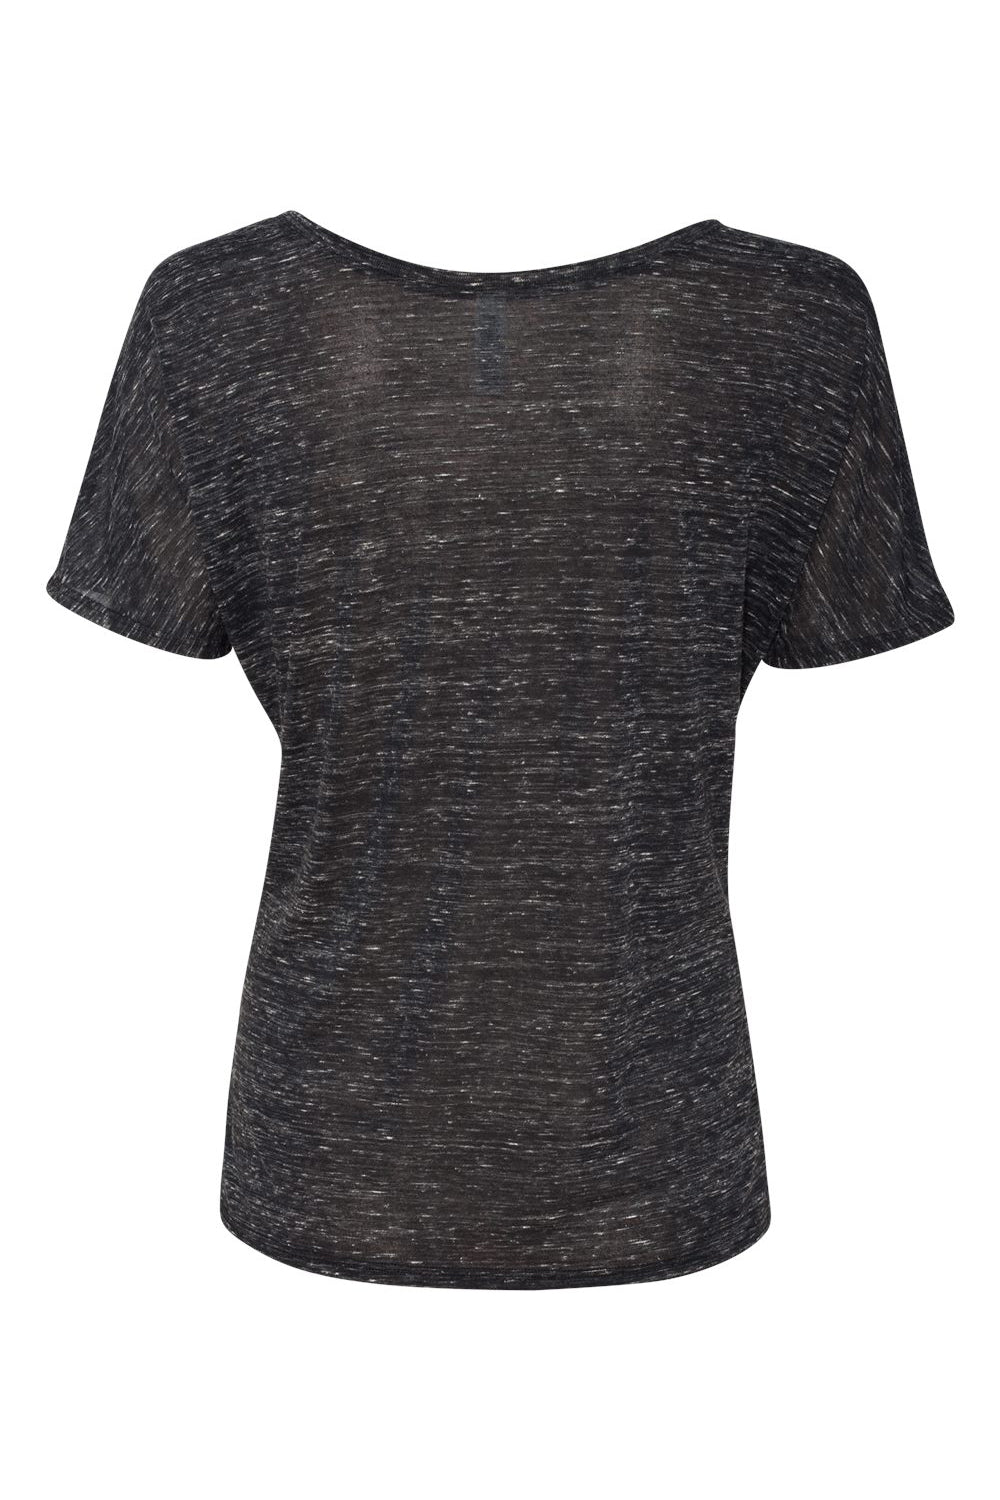 Bella + Canvas BC8816/8816 Womens Slouchy Short Sleeve Wide Neck T-Shirt Black Marble Flat Back